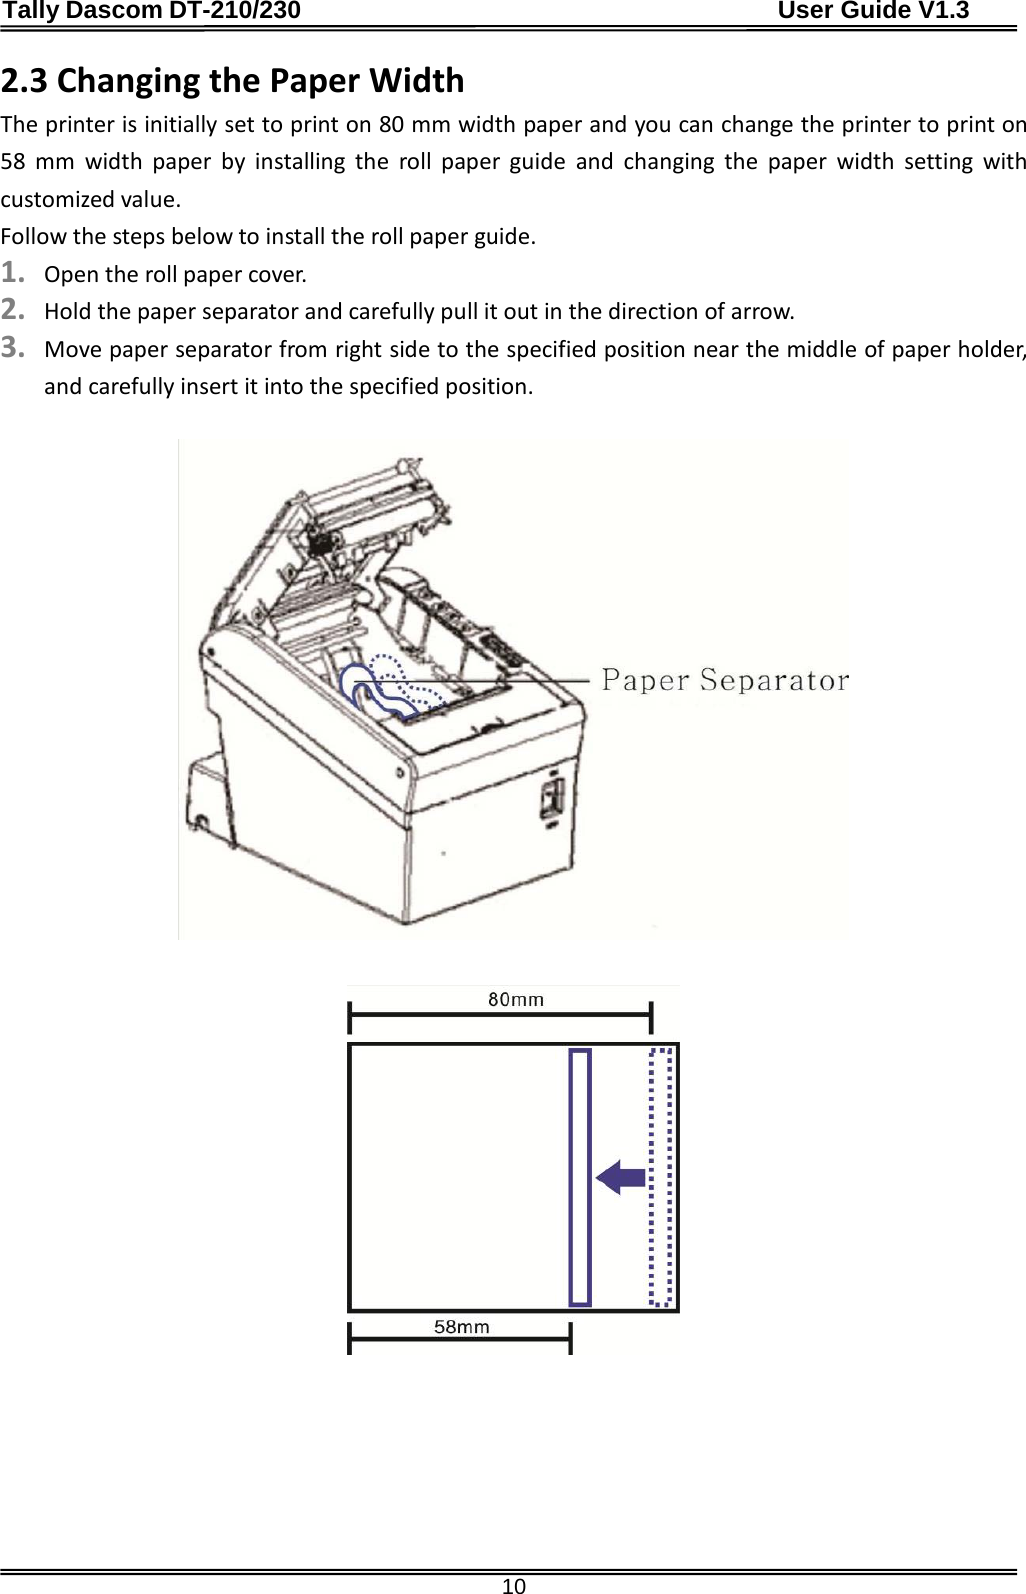 Tally Dascom DT-210/230                                      User Guide V1.3  10 2.3 Changing the Paper Width The printer is initially set to print on 80 mm width paper and you can change the printer to print on 58 mm width paper by installing the roll paper guide and changing the paper width setting with customized value. Follow the steps below to install the roll paper guide. 1. Open the roll paper cover. 2. Hold the paper separator and carefully pull it out in the direction of arrow.   3. Move paper separator from right side to the specified position near the middle of paper holder, and carefully insert it into the specified position.               